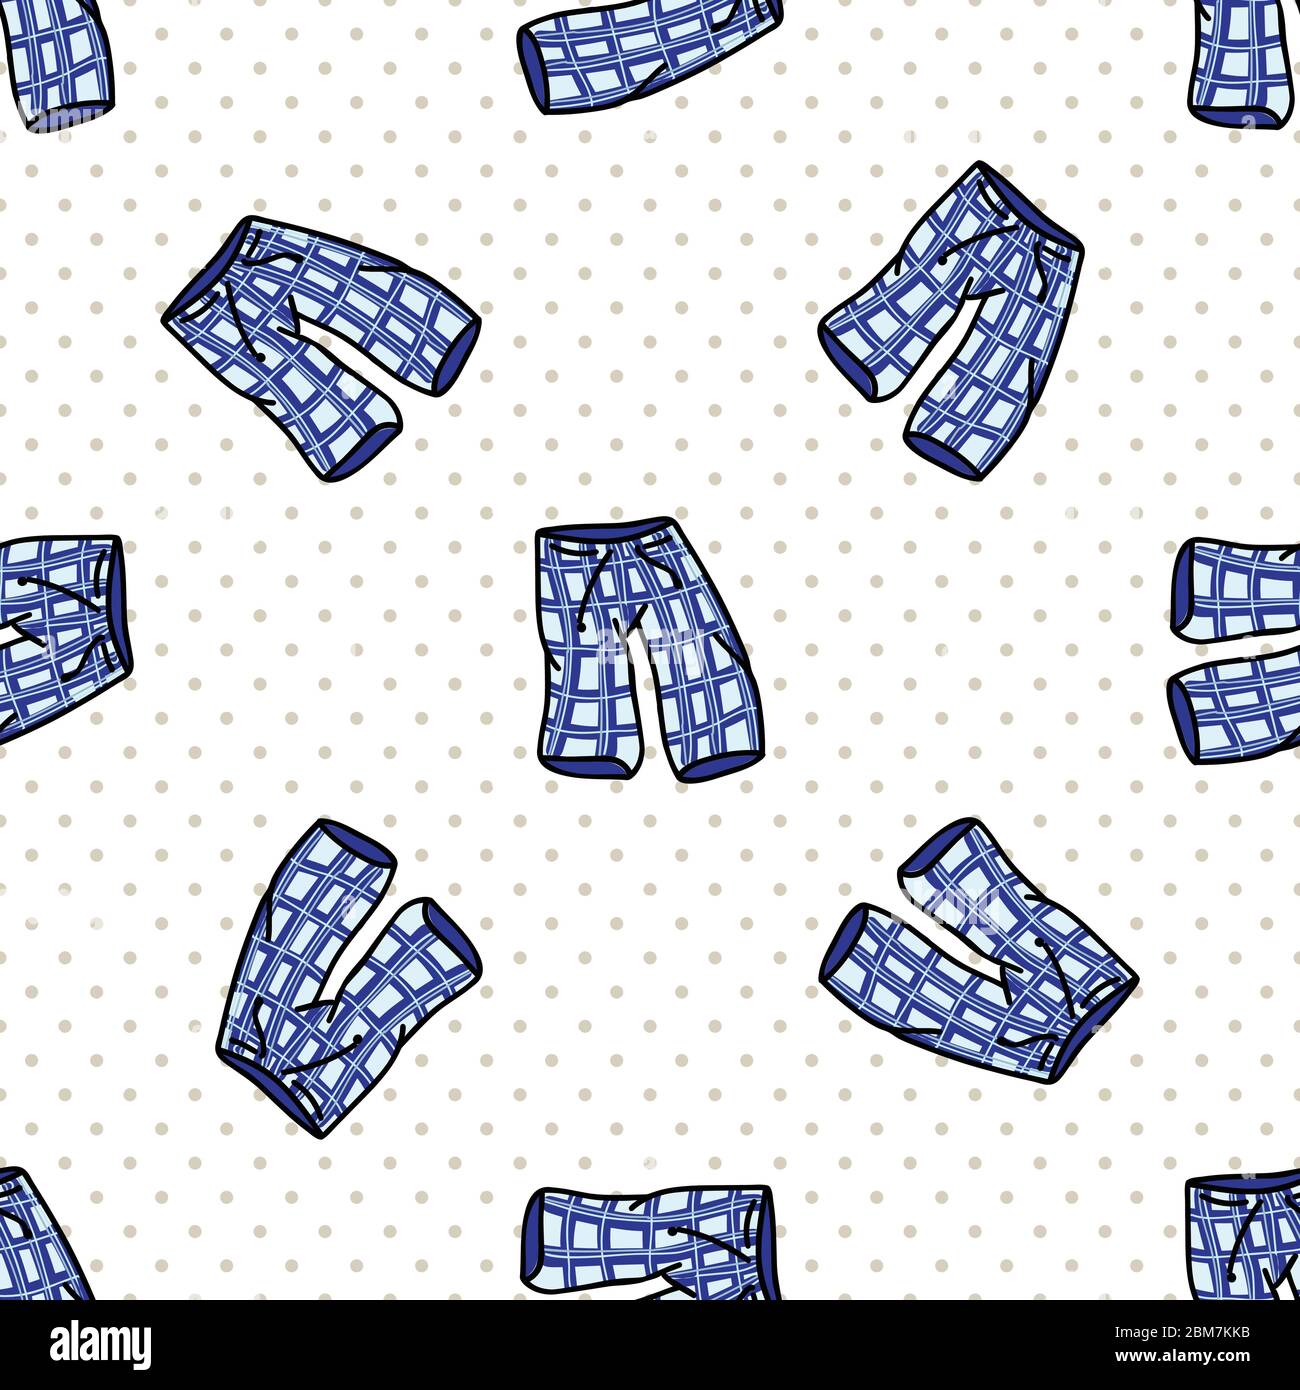 https://c8.alamy.com/comp/2BM7KKB/hand-drawn-cute-bed-blue-time-pajama-pants-seamless-vector-pattern-adorable-sleeping-clothes-with-plaid-for-peaceful-sleep-background-cozy-pink-and-2BM7KKB.jpg